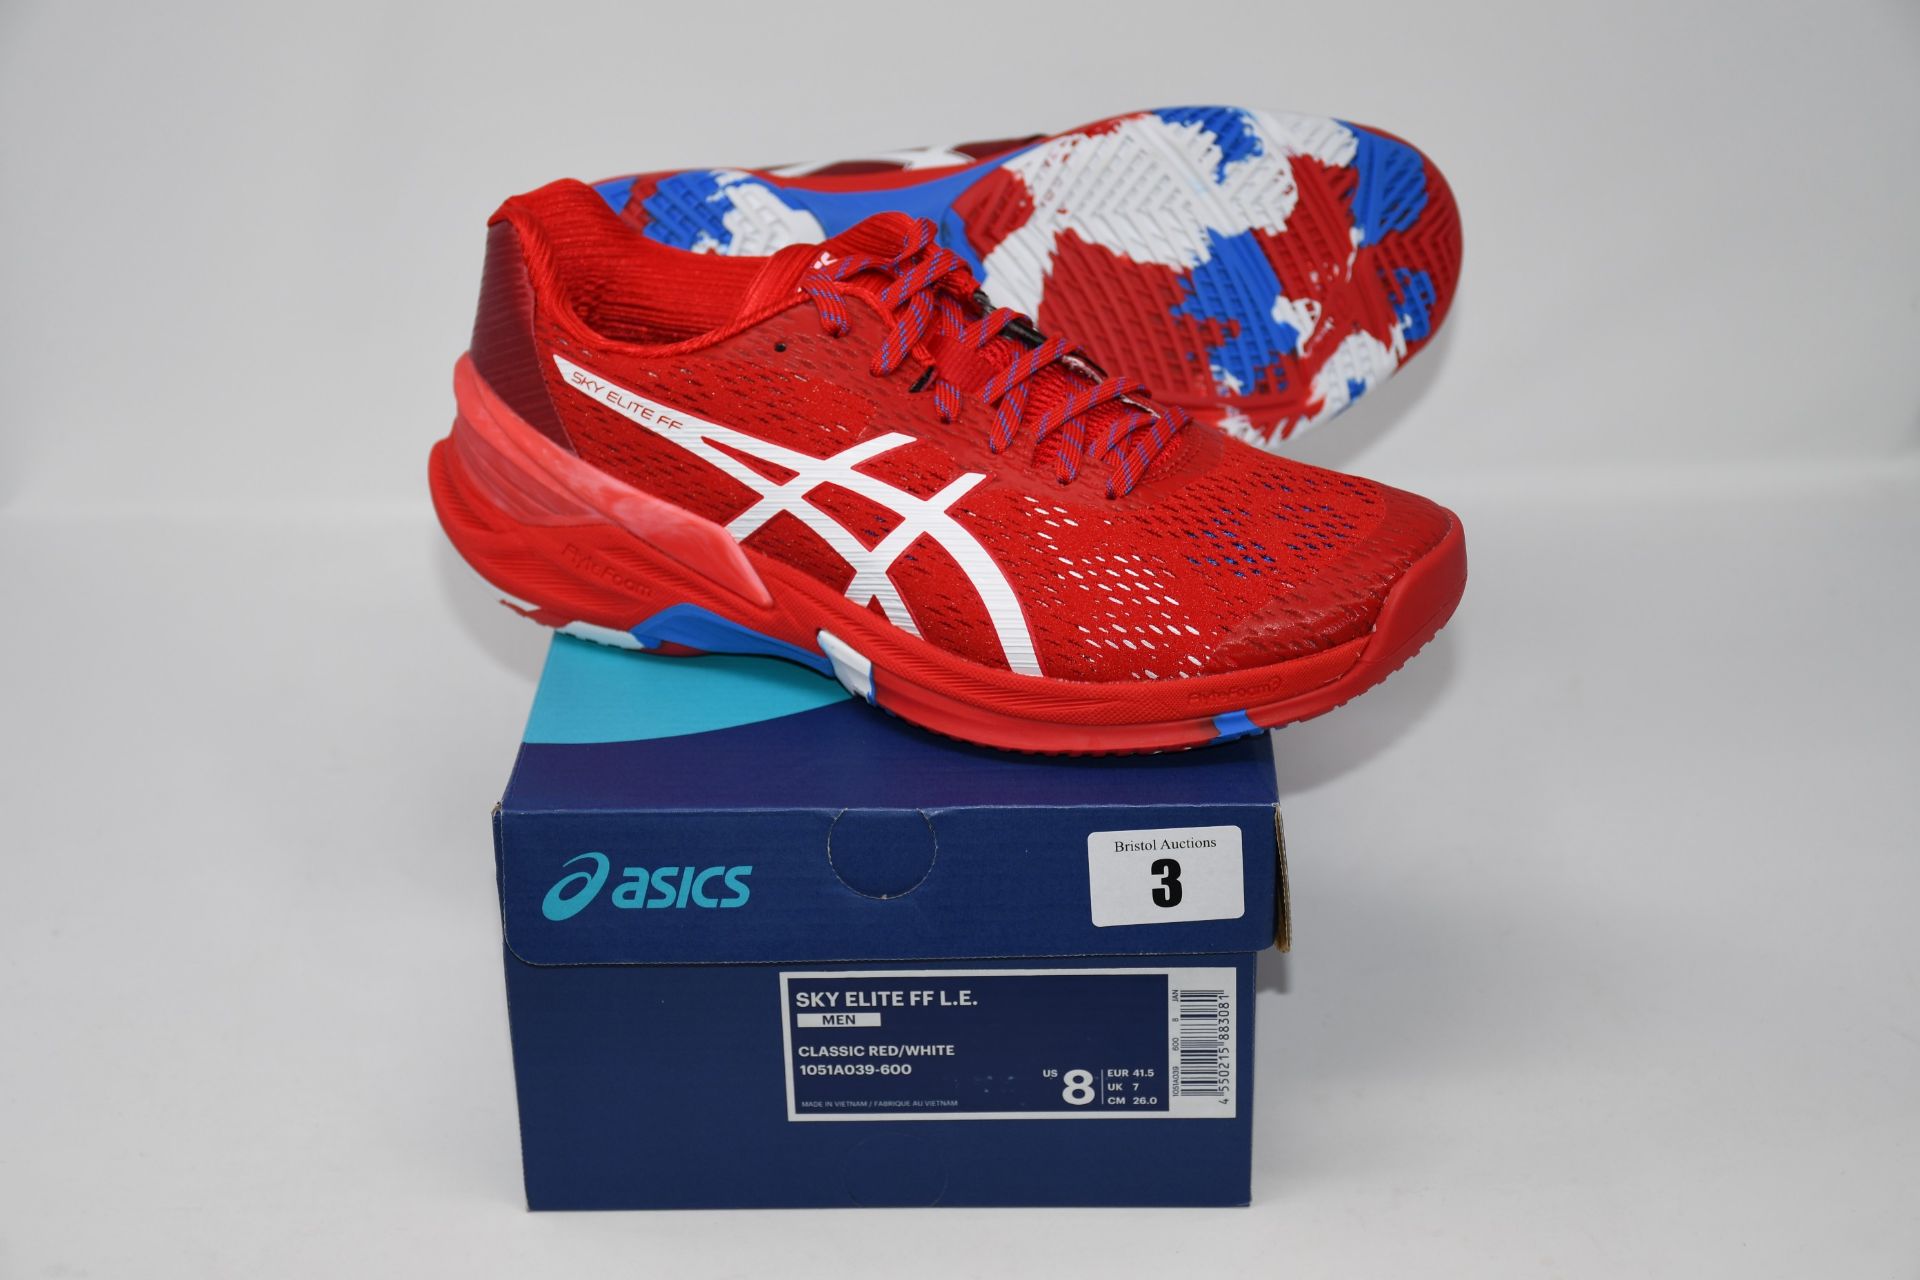 One pair of man's boxed as new Asics Sky Elite FF L.E trainers in classic red and white (UK 7).